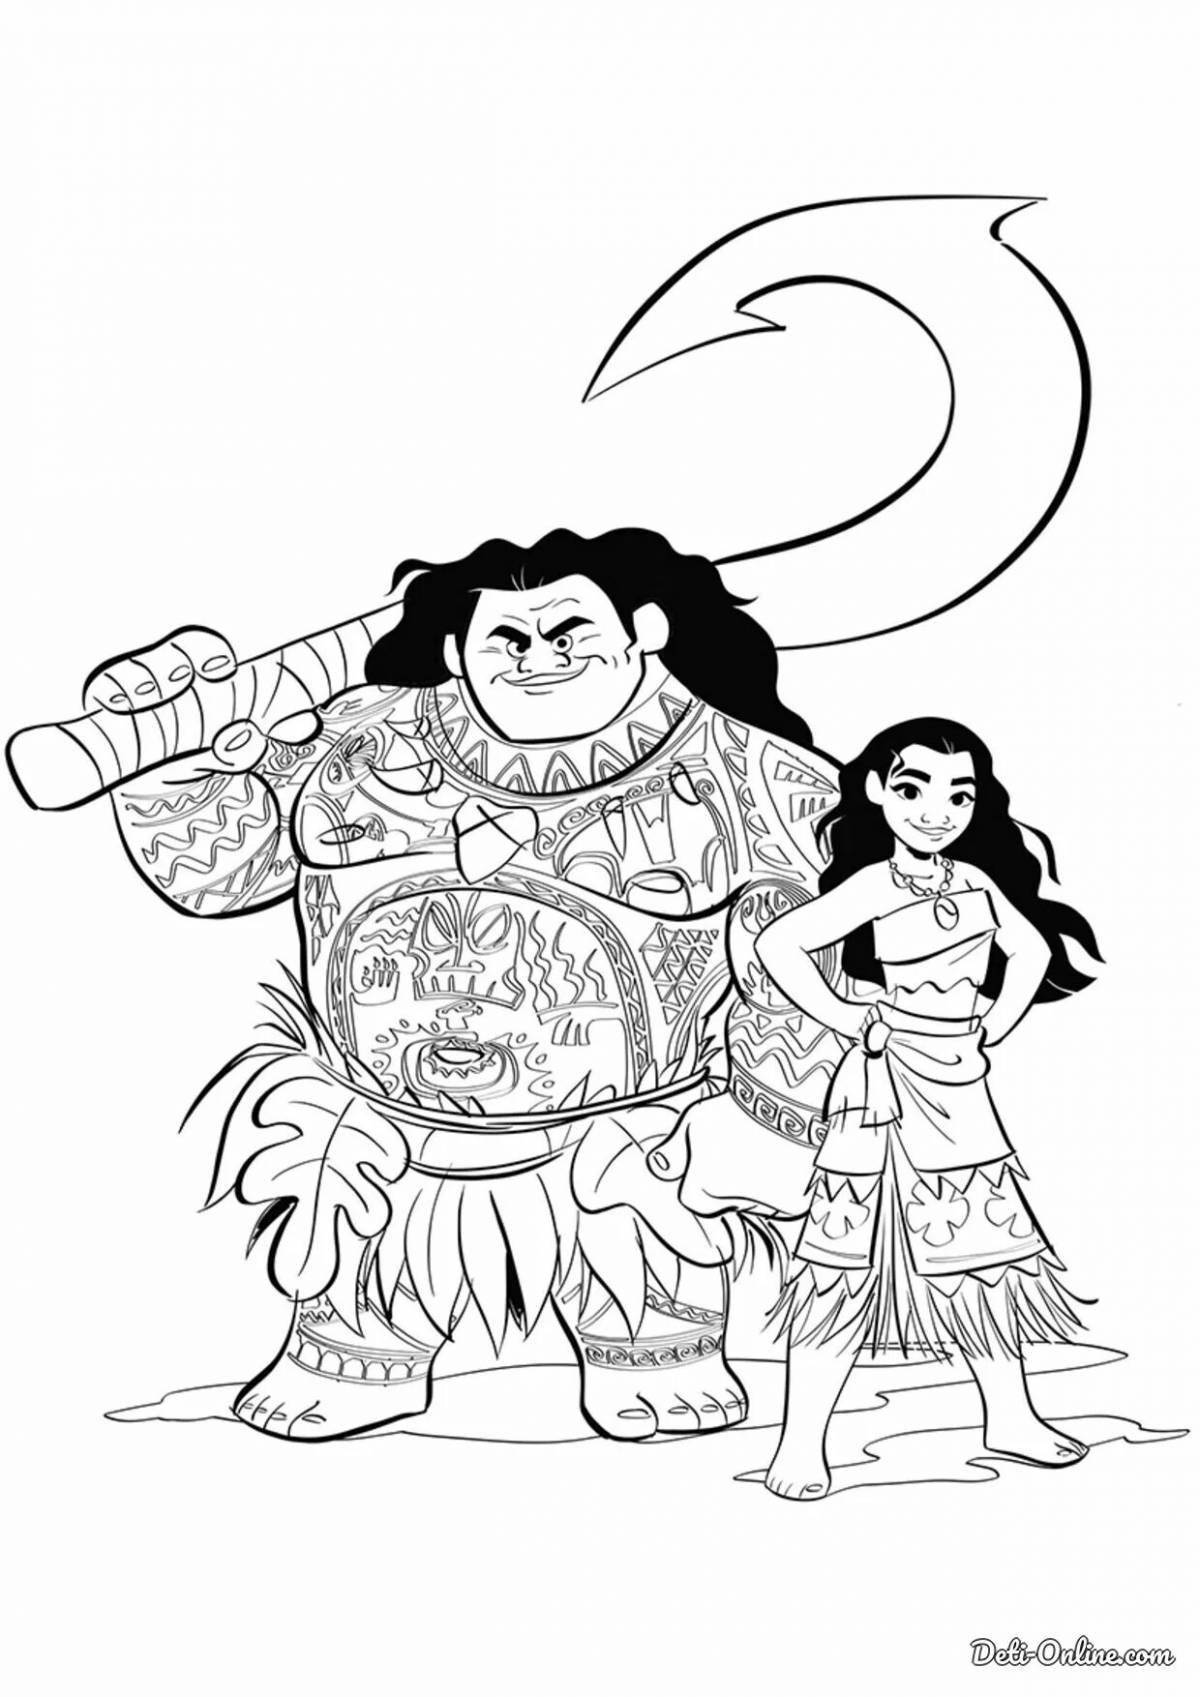 Moana girl coloring page